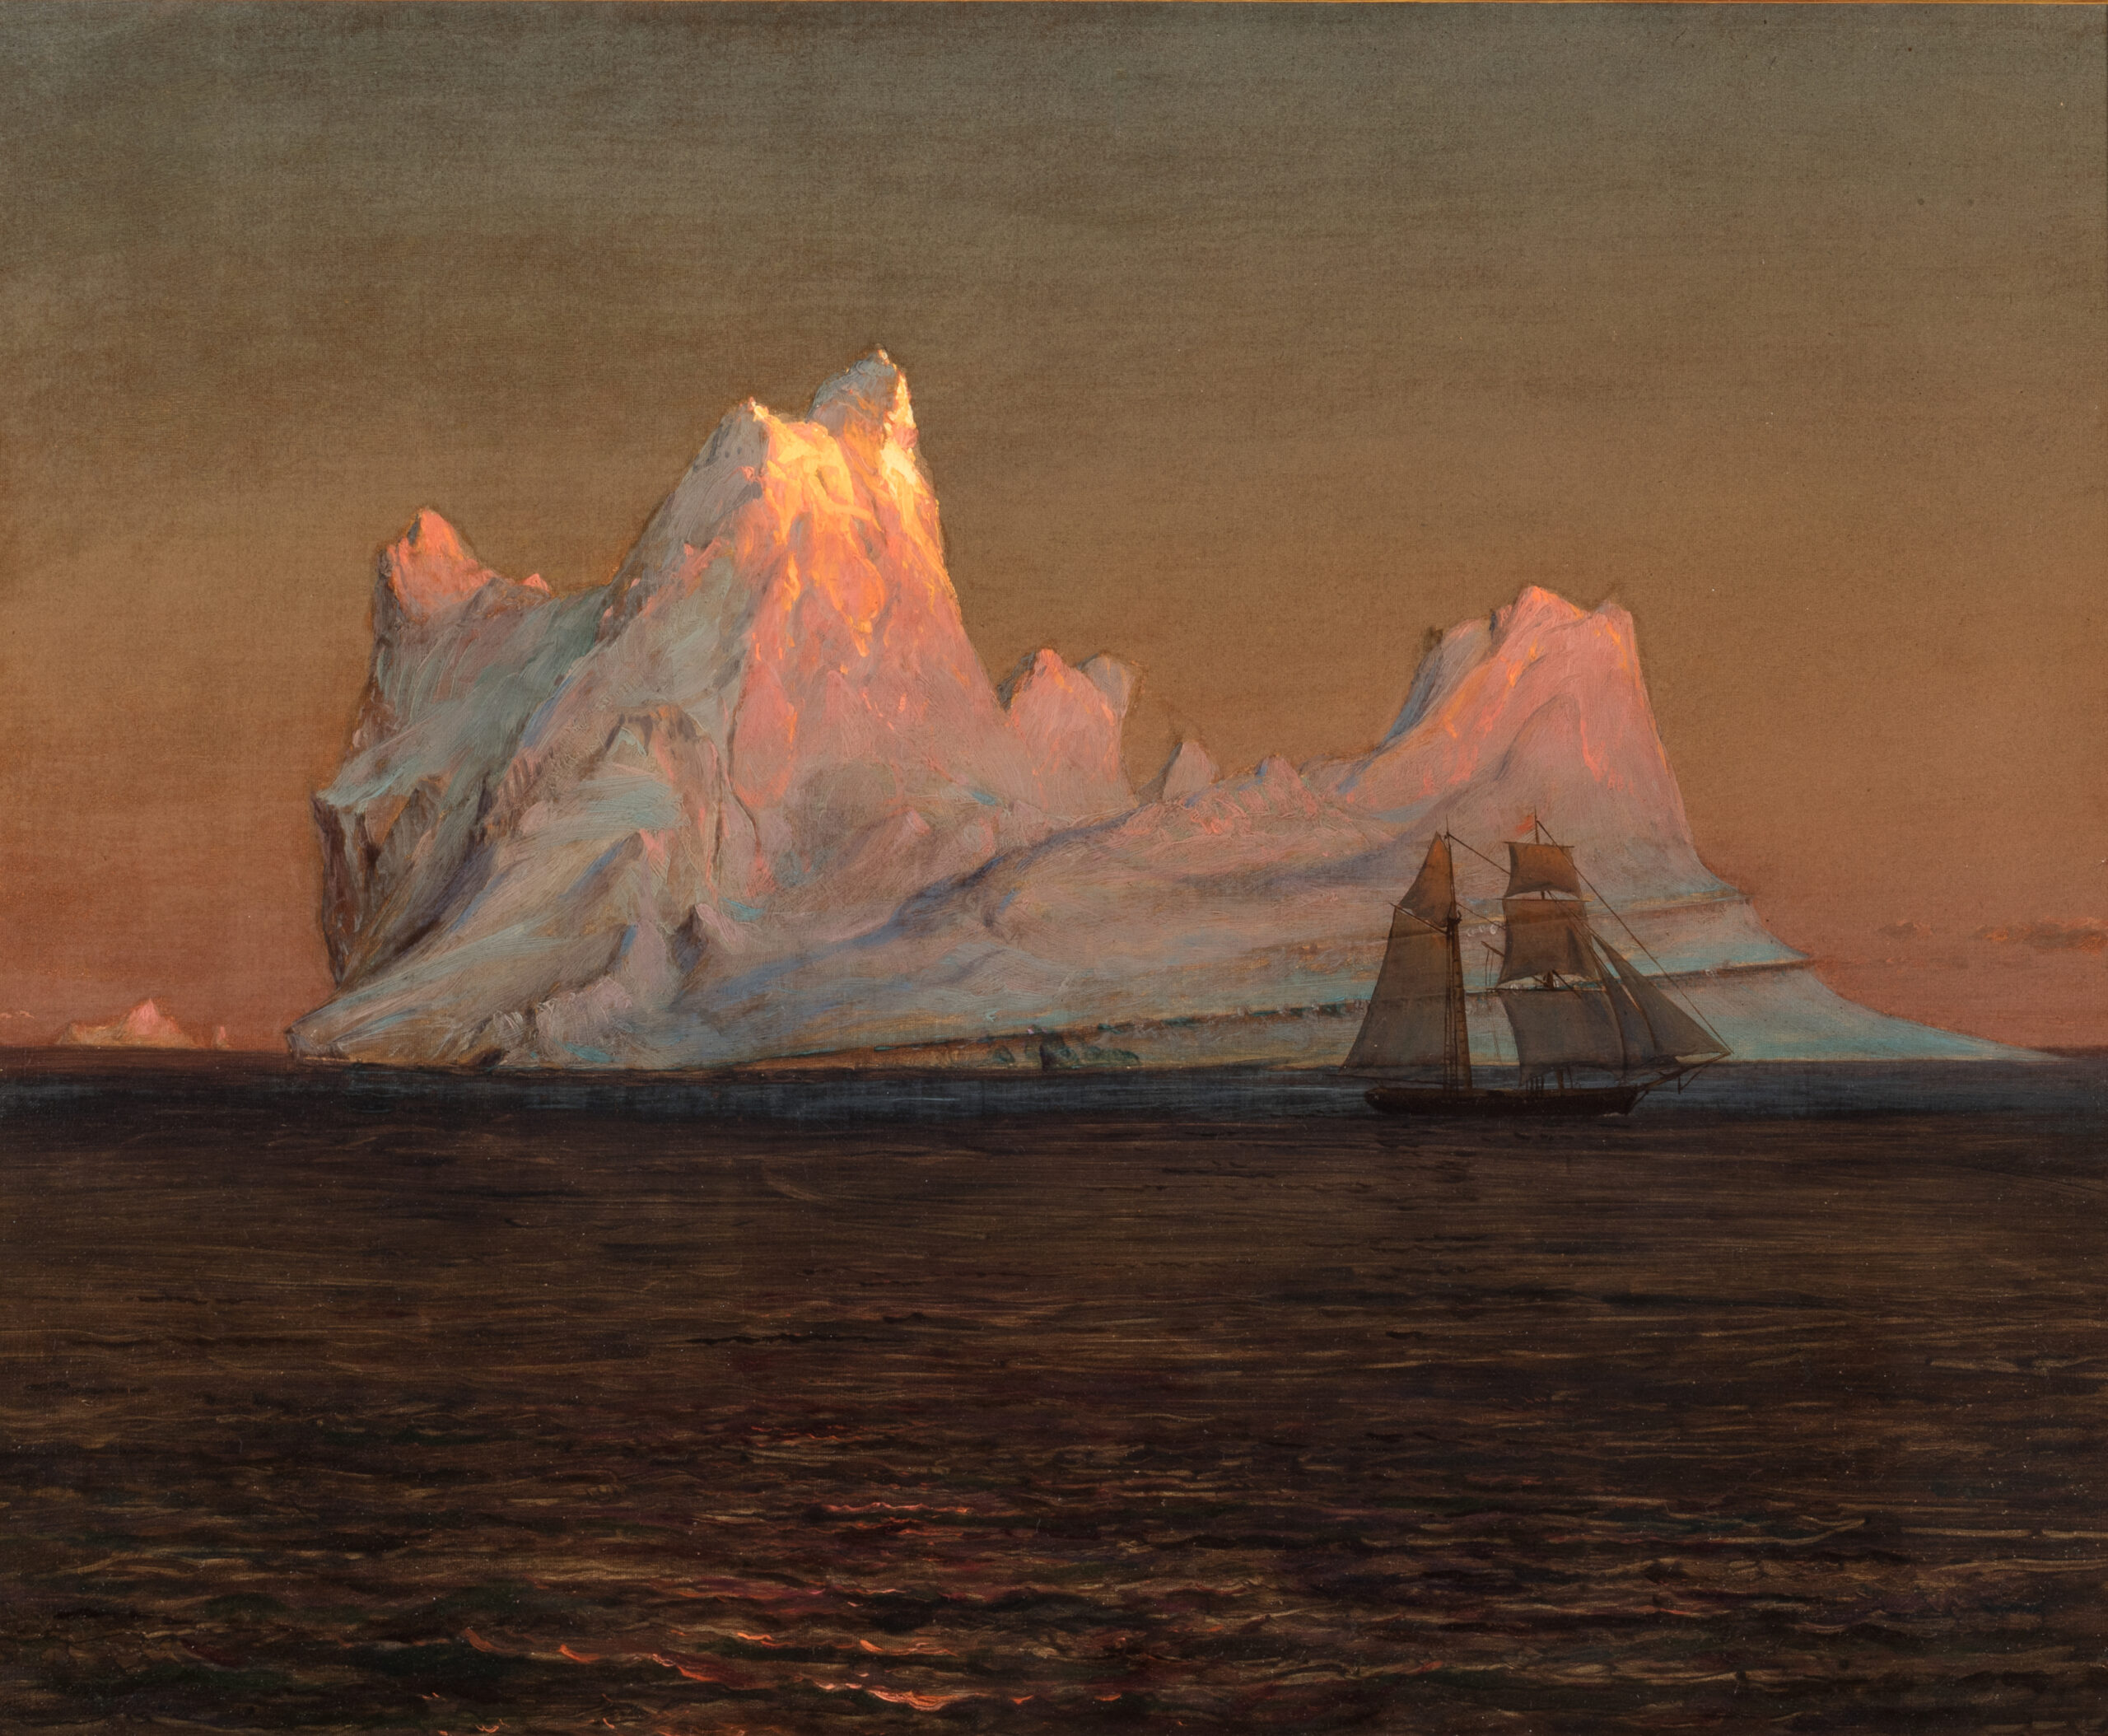 Painting of an iceberg in the sea with a ship in front of it.